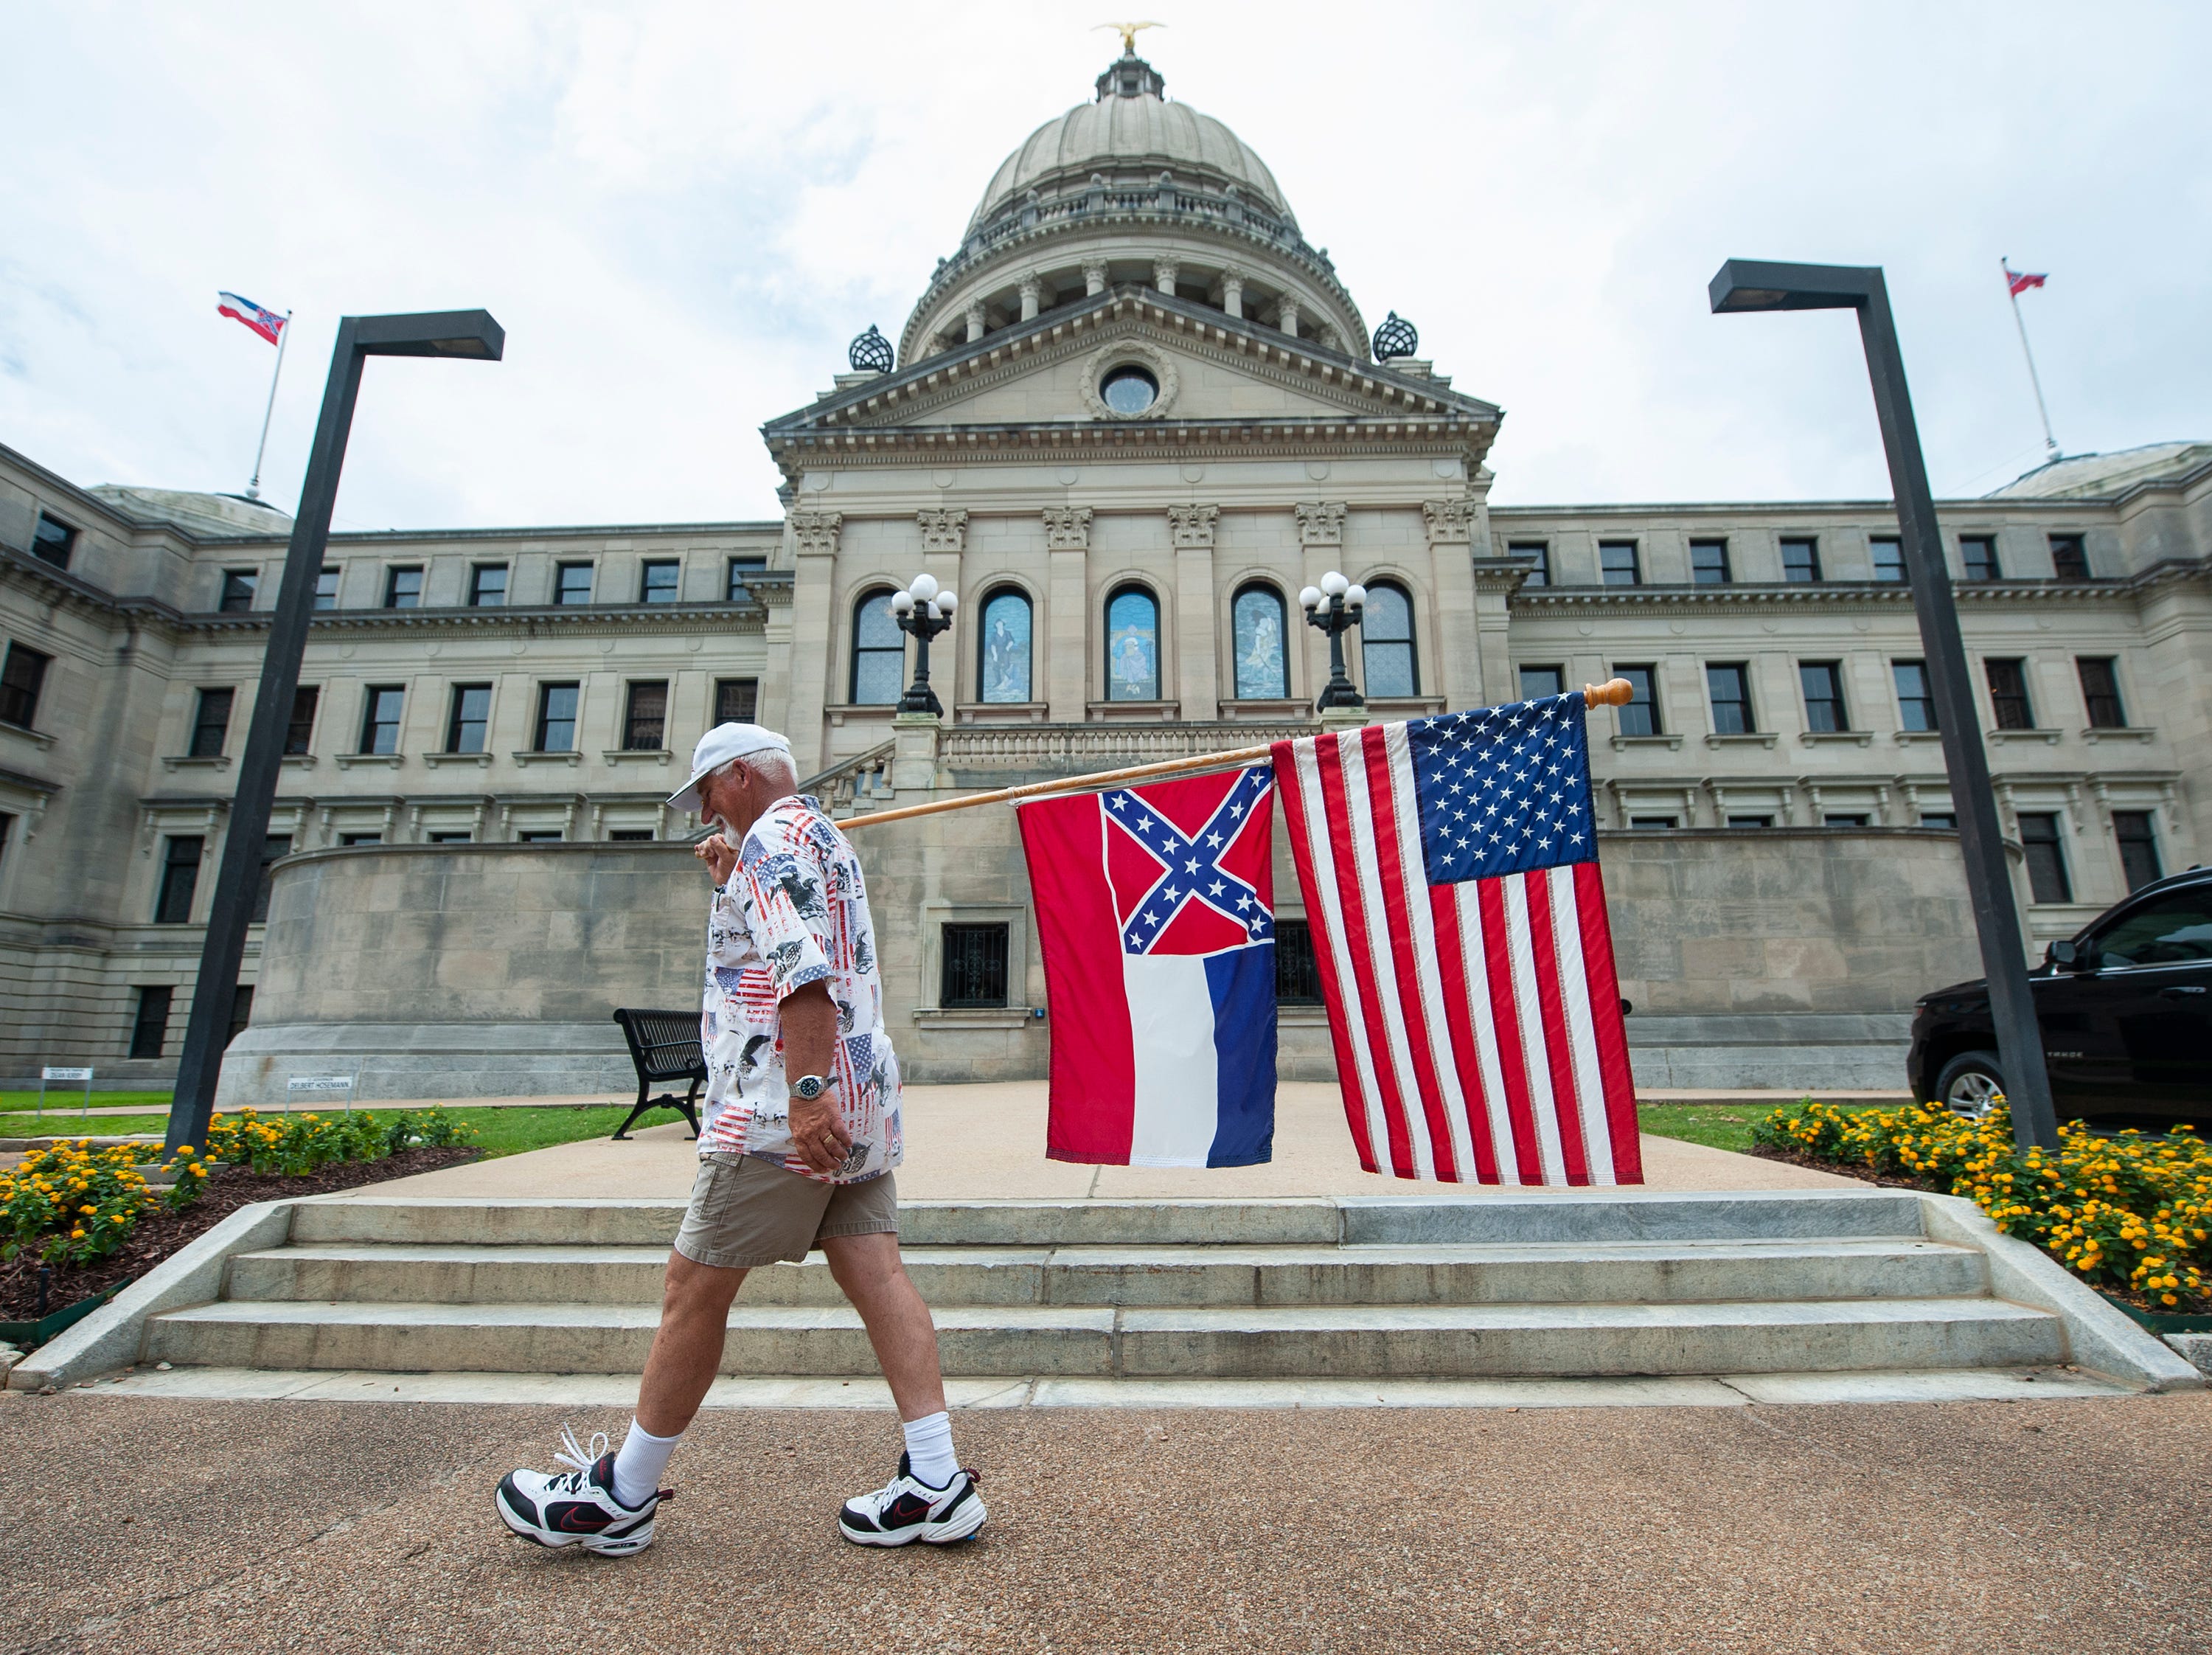 breaking news mississippi lawmakers overwhelmingly pass bill to create new state flag without confederate battle emblem